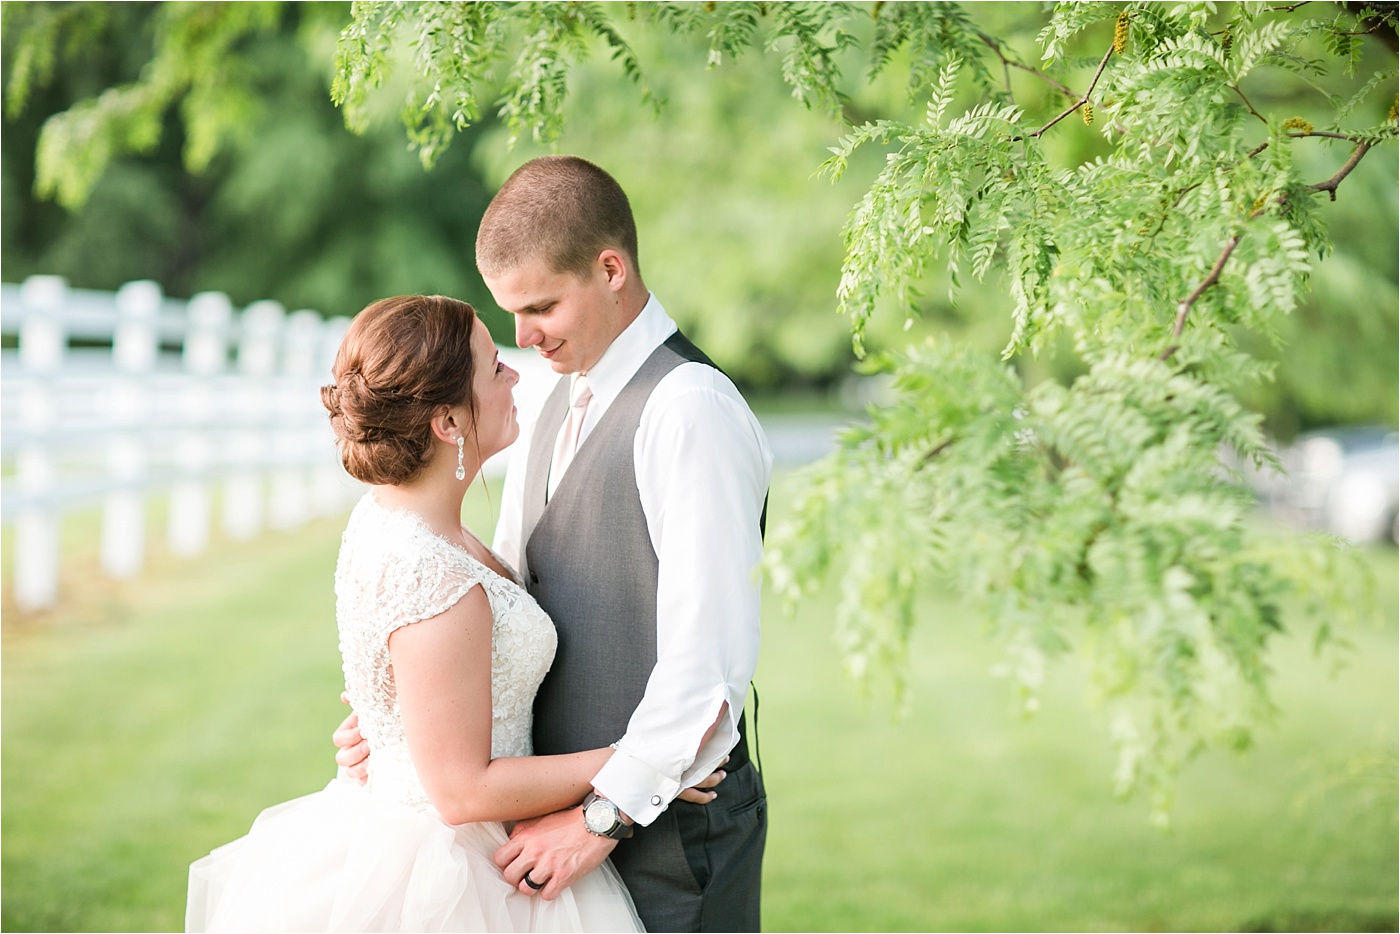 A Blush Outdoor wedding at Irongate Equestrian | KariMe Photography_0175